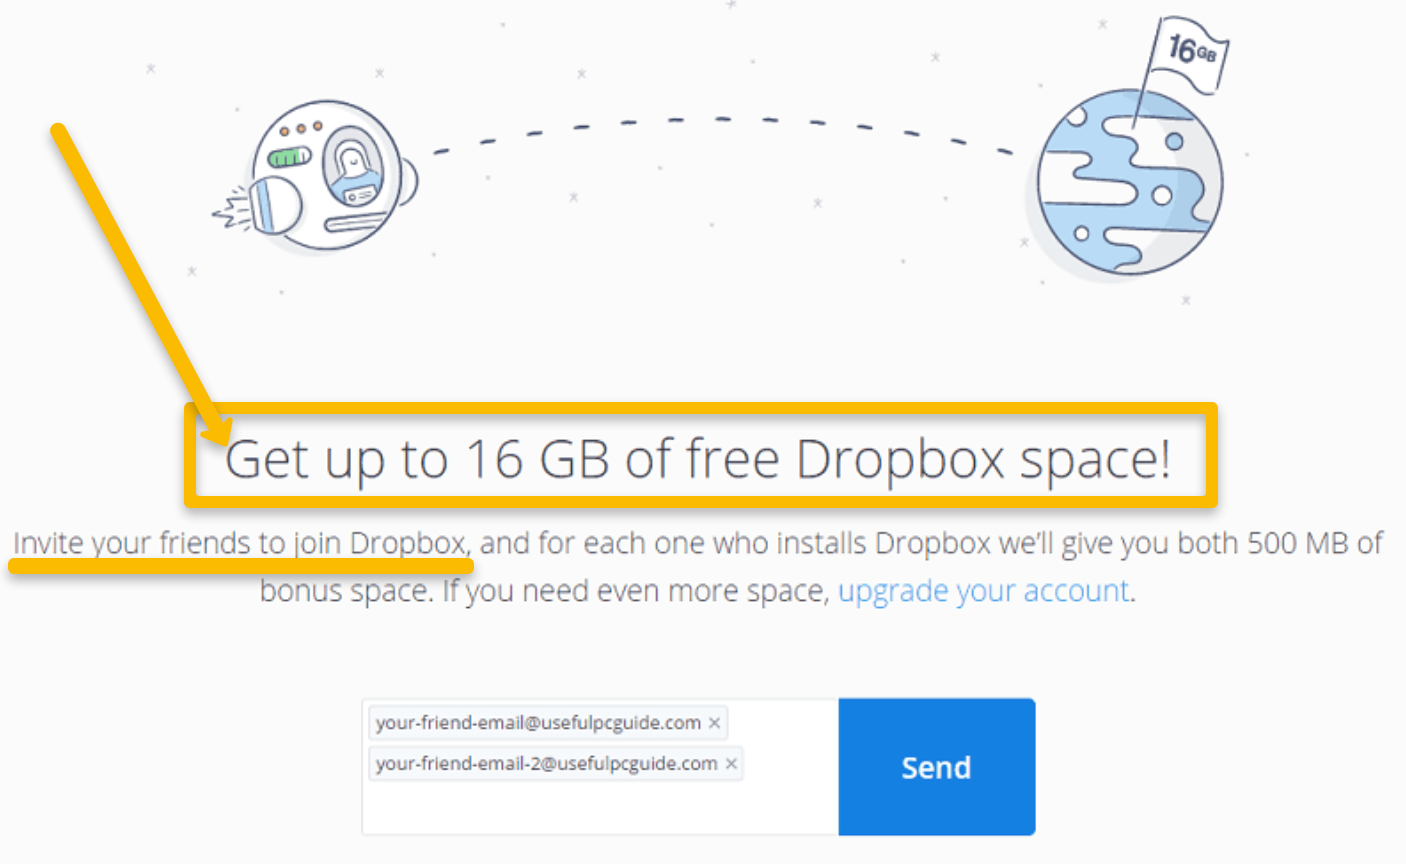 Dropbox Referral Campaign as part of acquisition marketing campaign